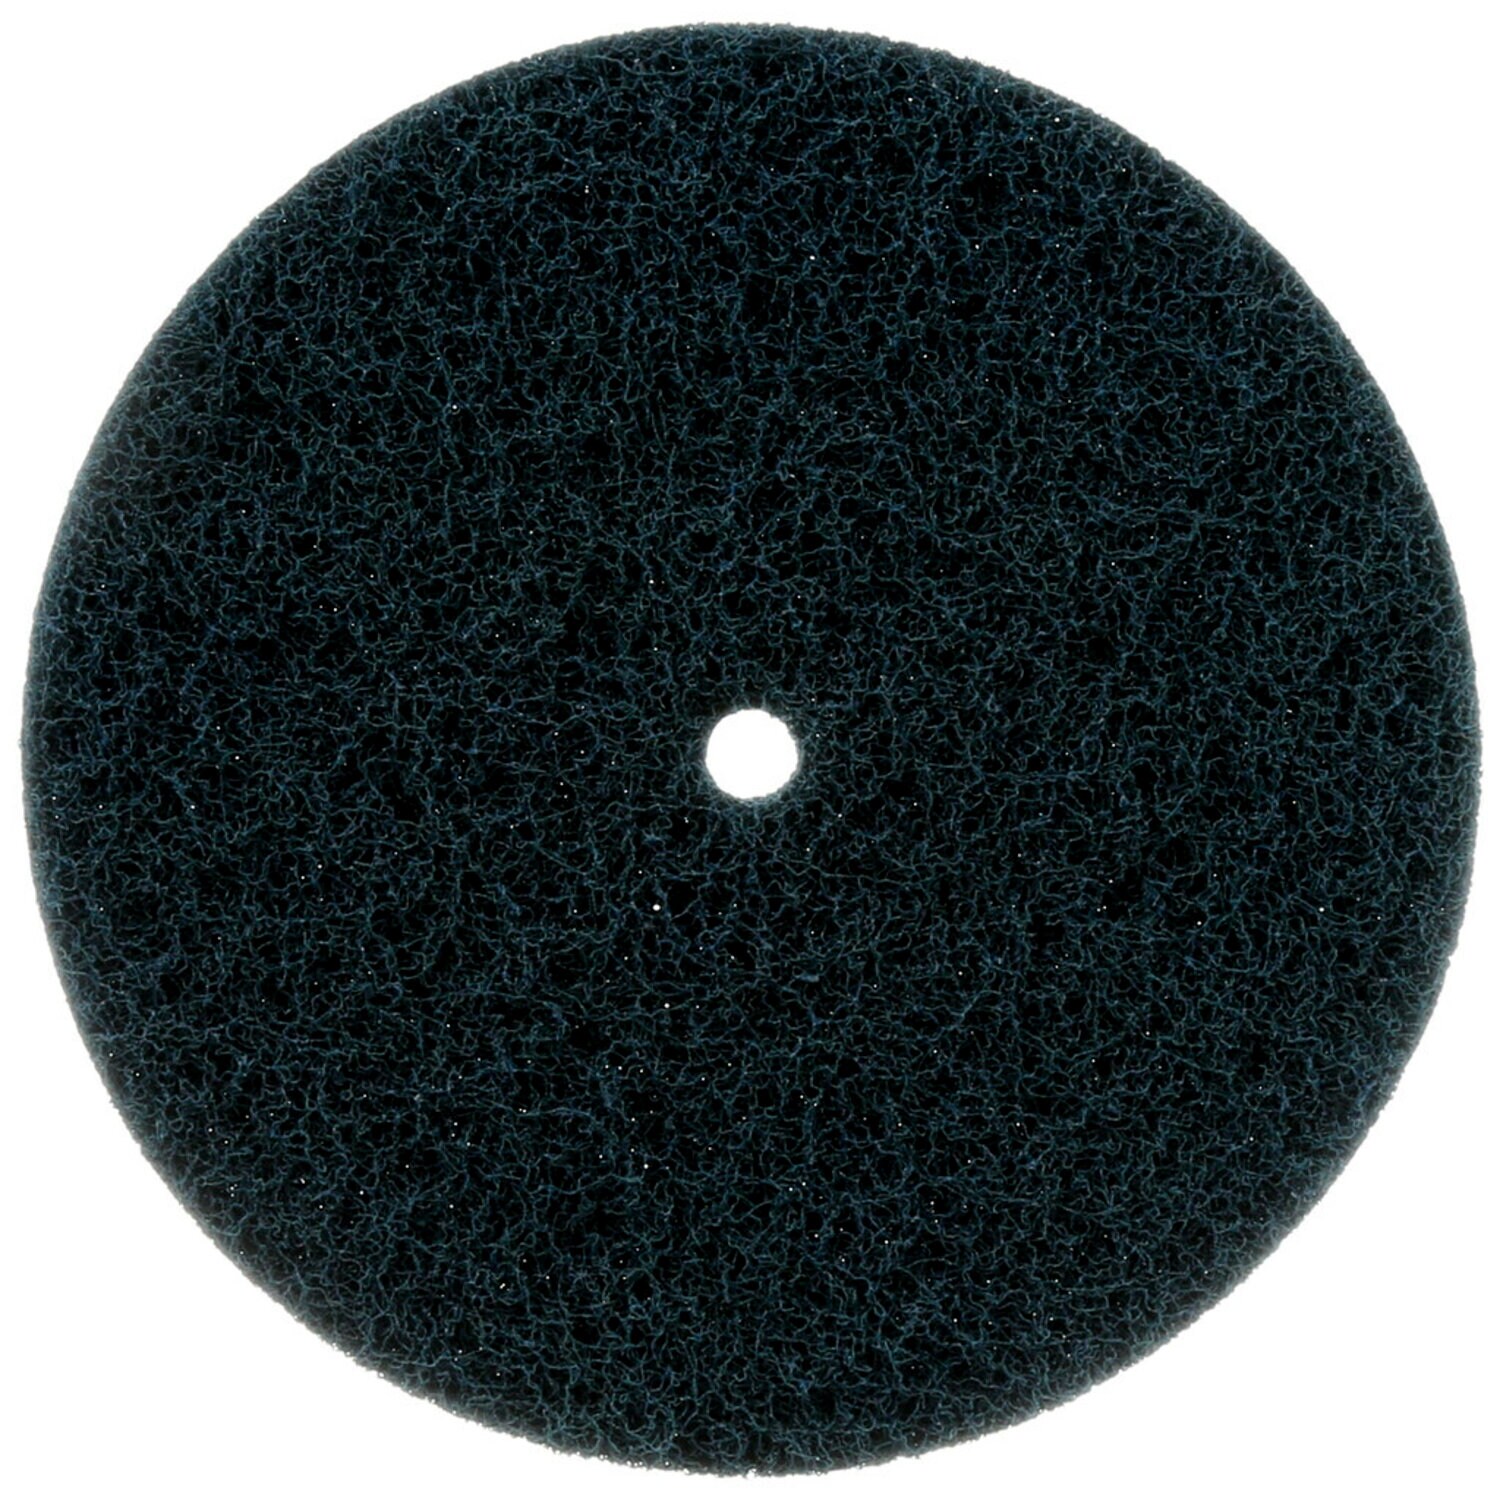 7100090356 - Standard Abrasives Buff and Blend HS Disc, 816910, 8 in x 3/4 in A MED,
5/Pac, 50 ea/Case